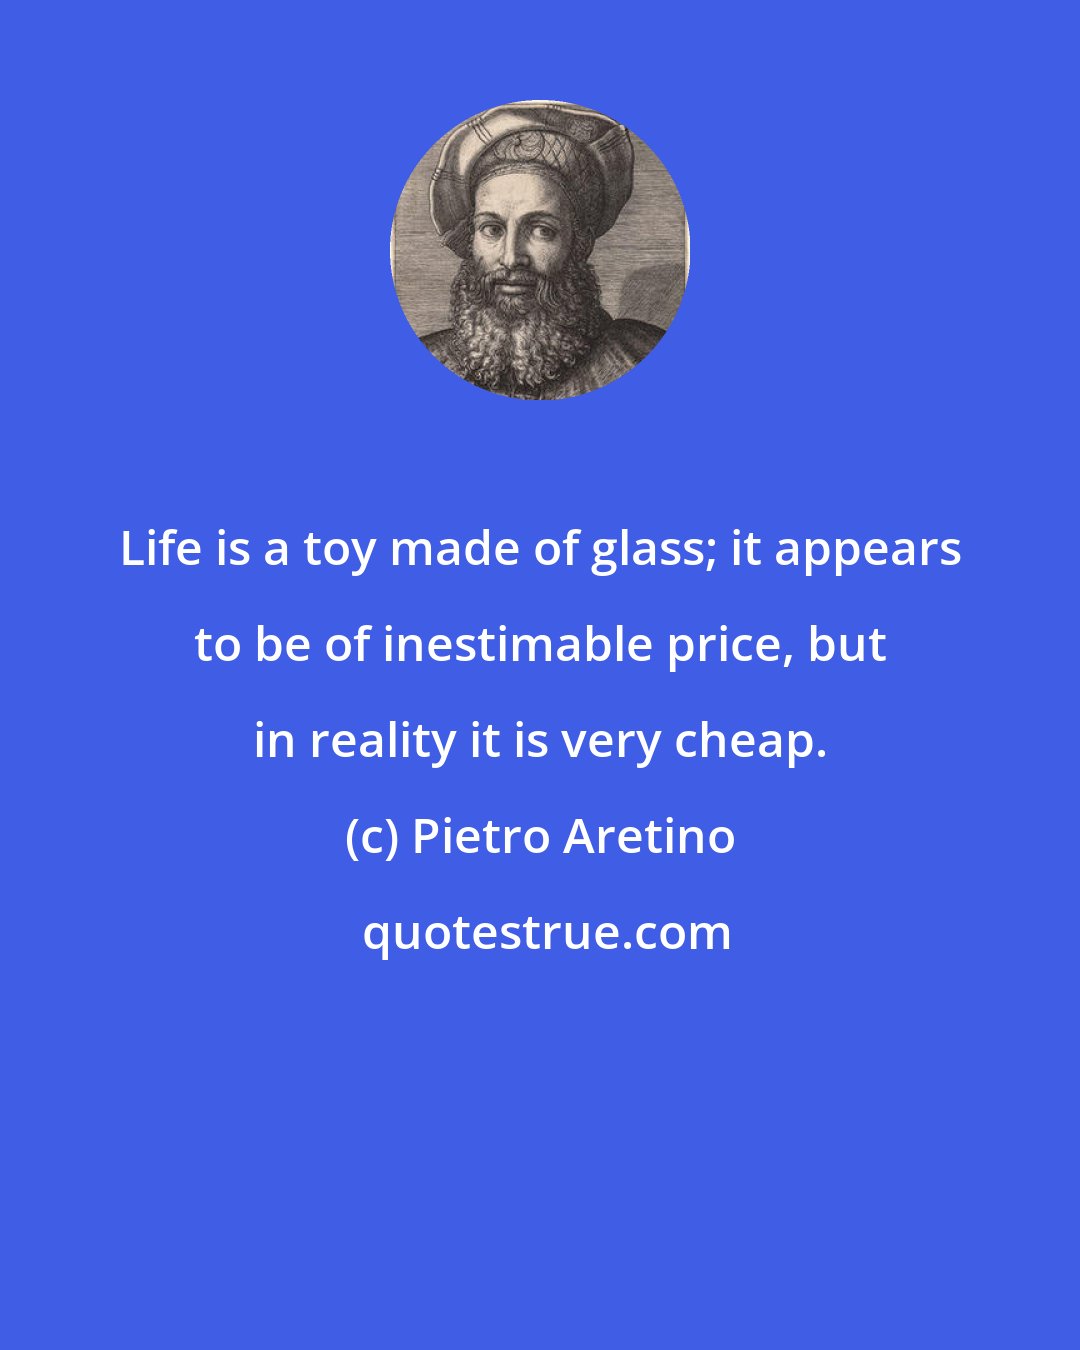 Pietro Aretino: Life is a toy made of glass; it appears to be of inestimable price, but in reality it is very cheap.